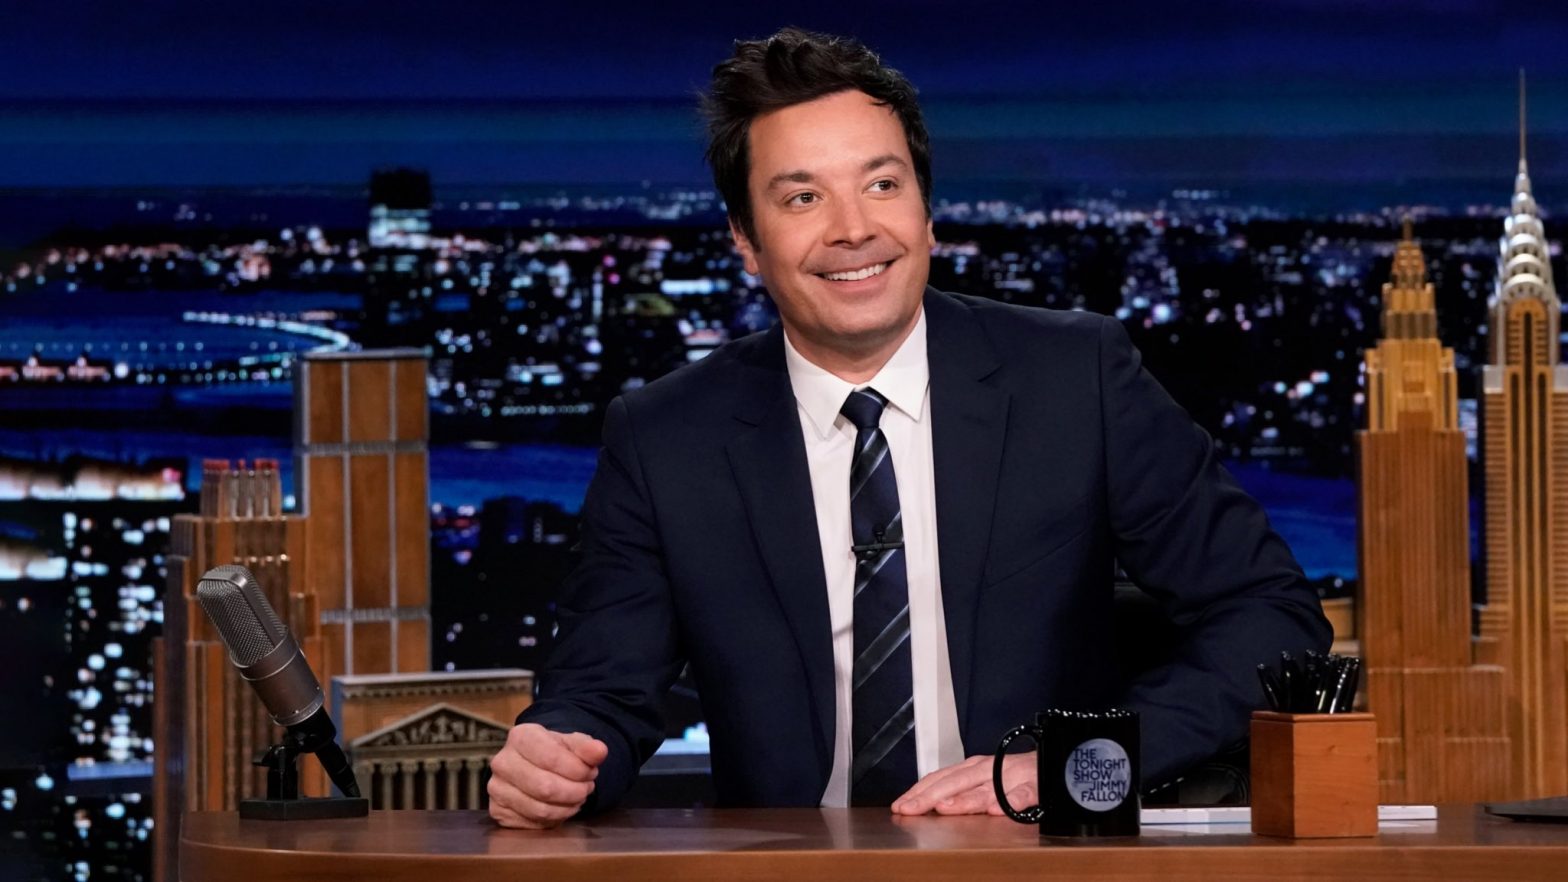 ‘Bad Jimmy Days’: Ex-Tonight Show staffers expose toxic work environment including drunk, erratic host